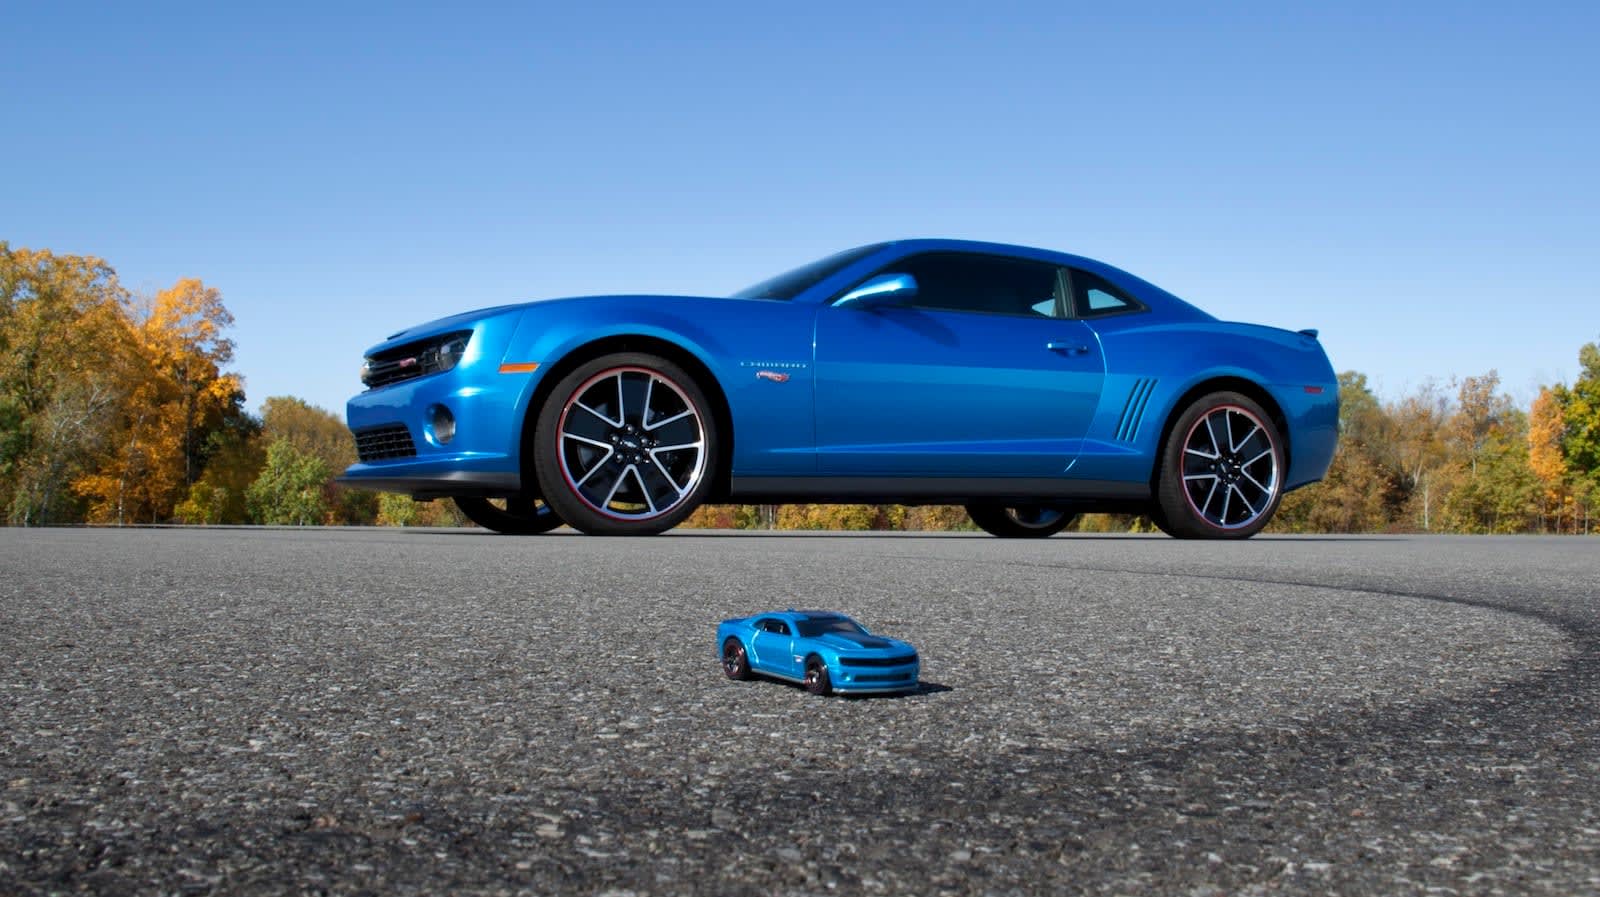 Chevrolet Camaro Hot Wheels Edition brings toy car to life - Drive